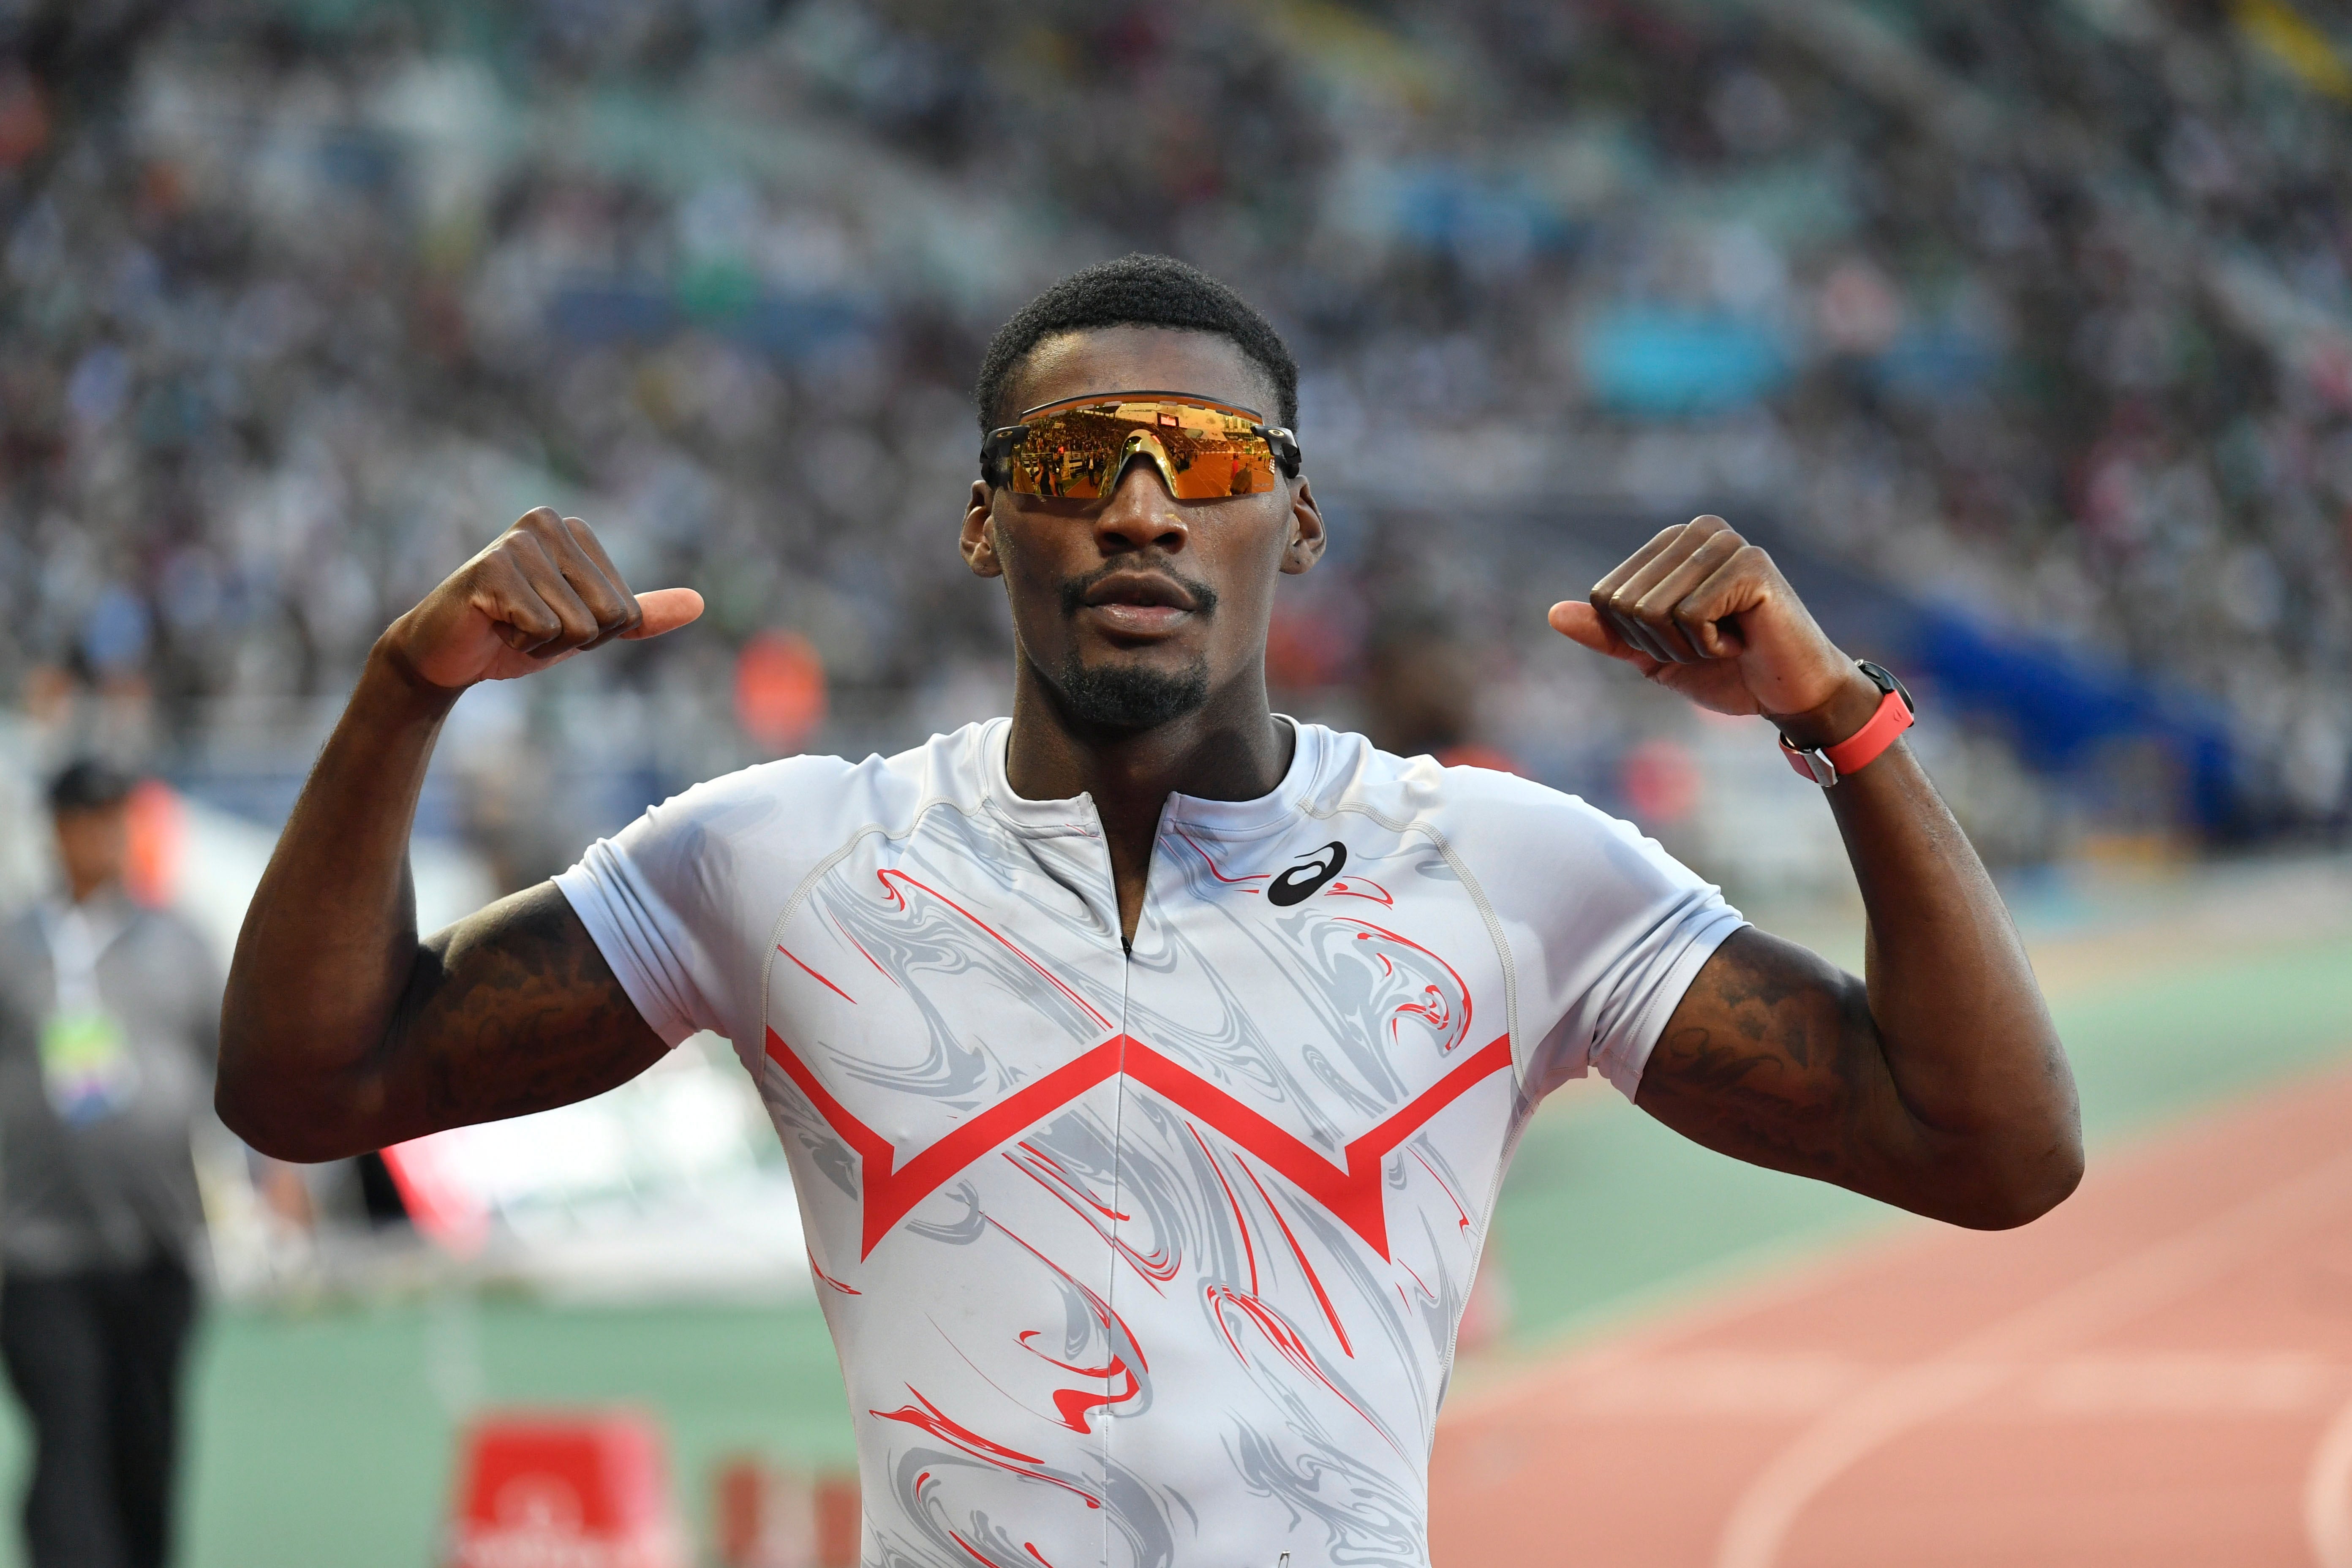 Fred Kerley of USA celebrates winning the 100m Men final at the Diamond League meeting in Rabat